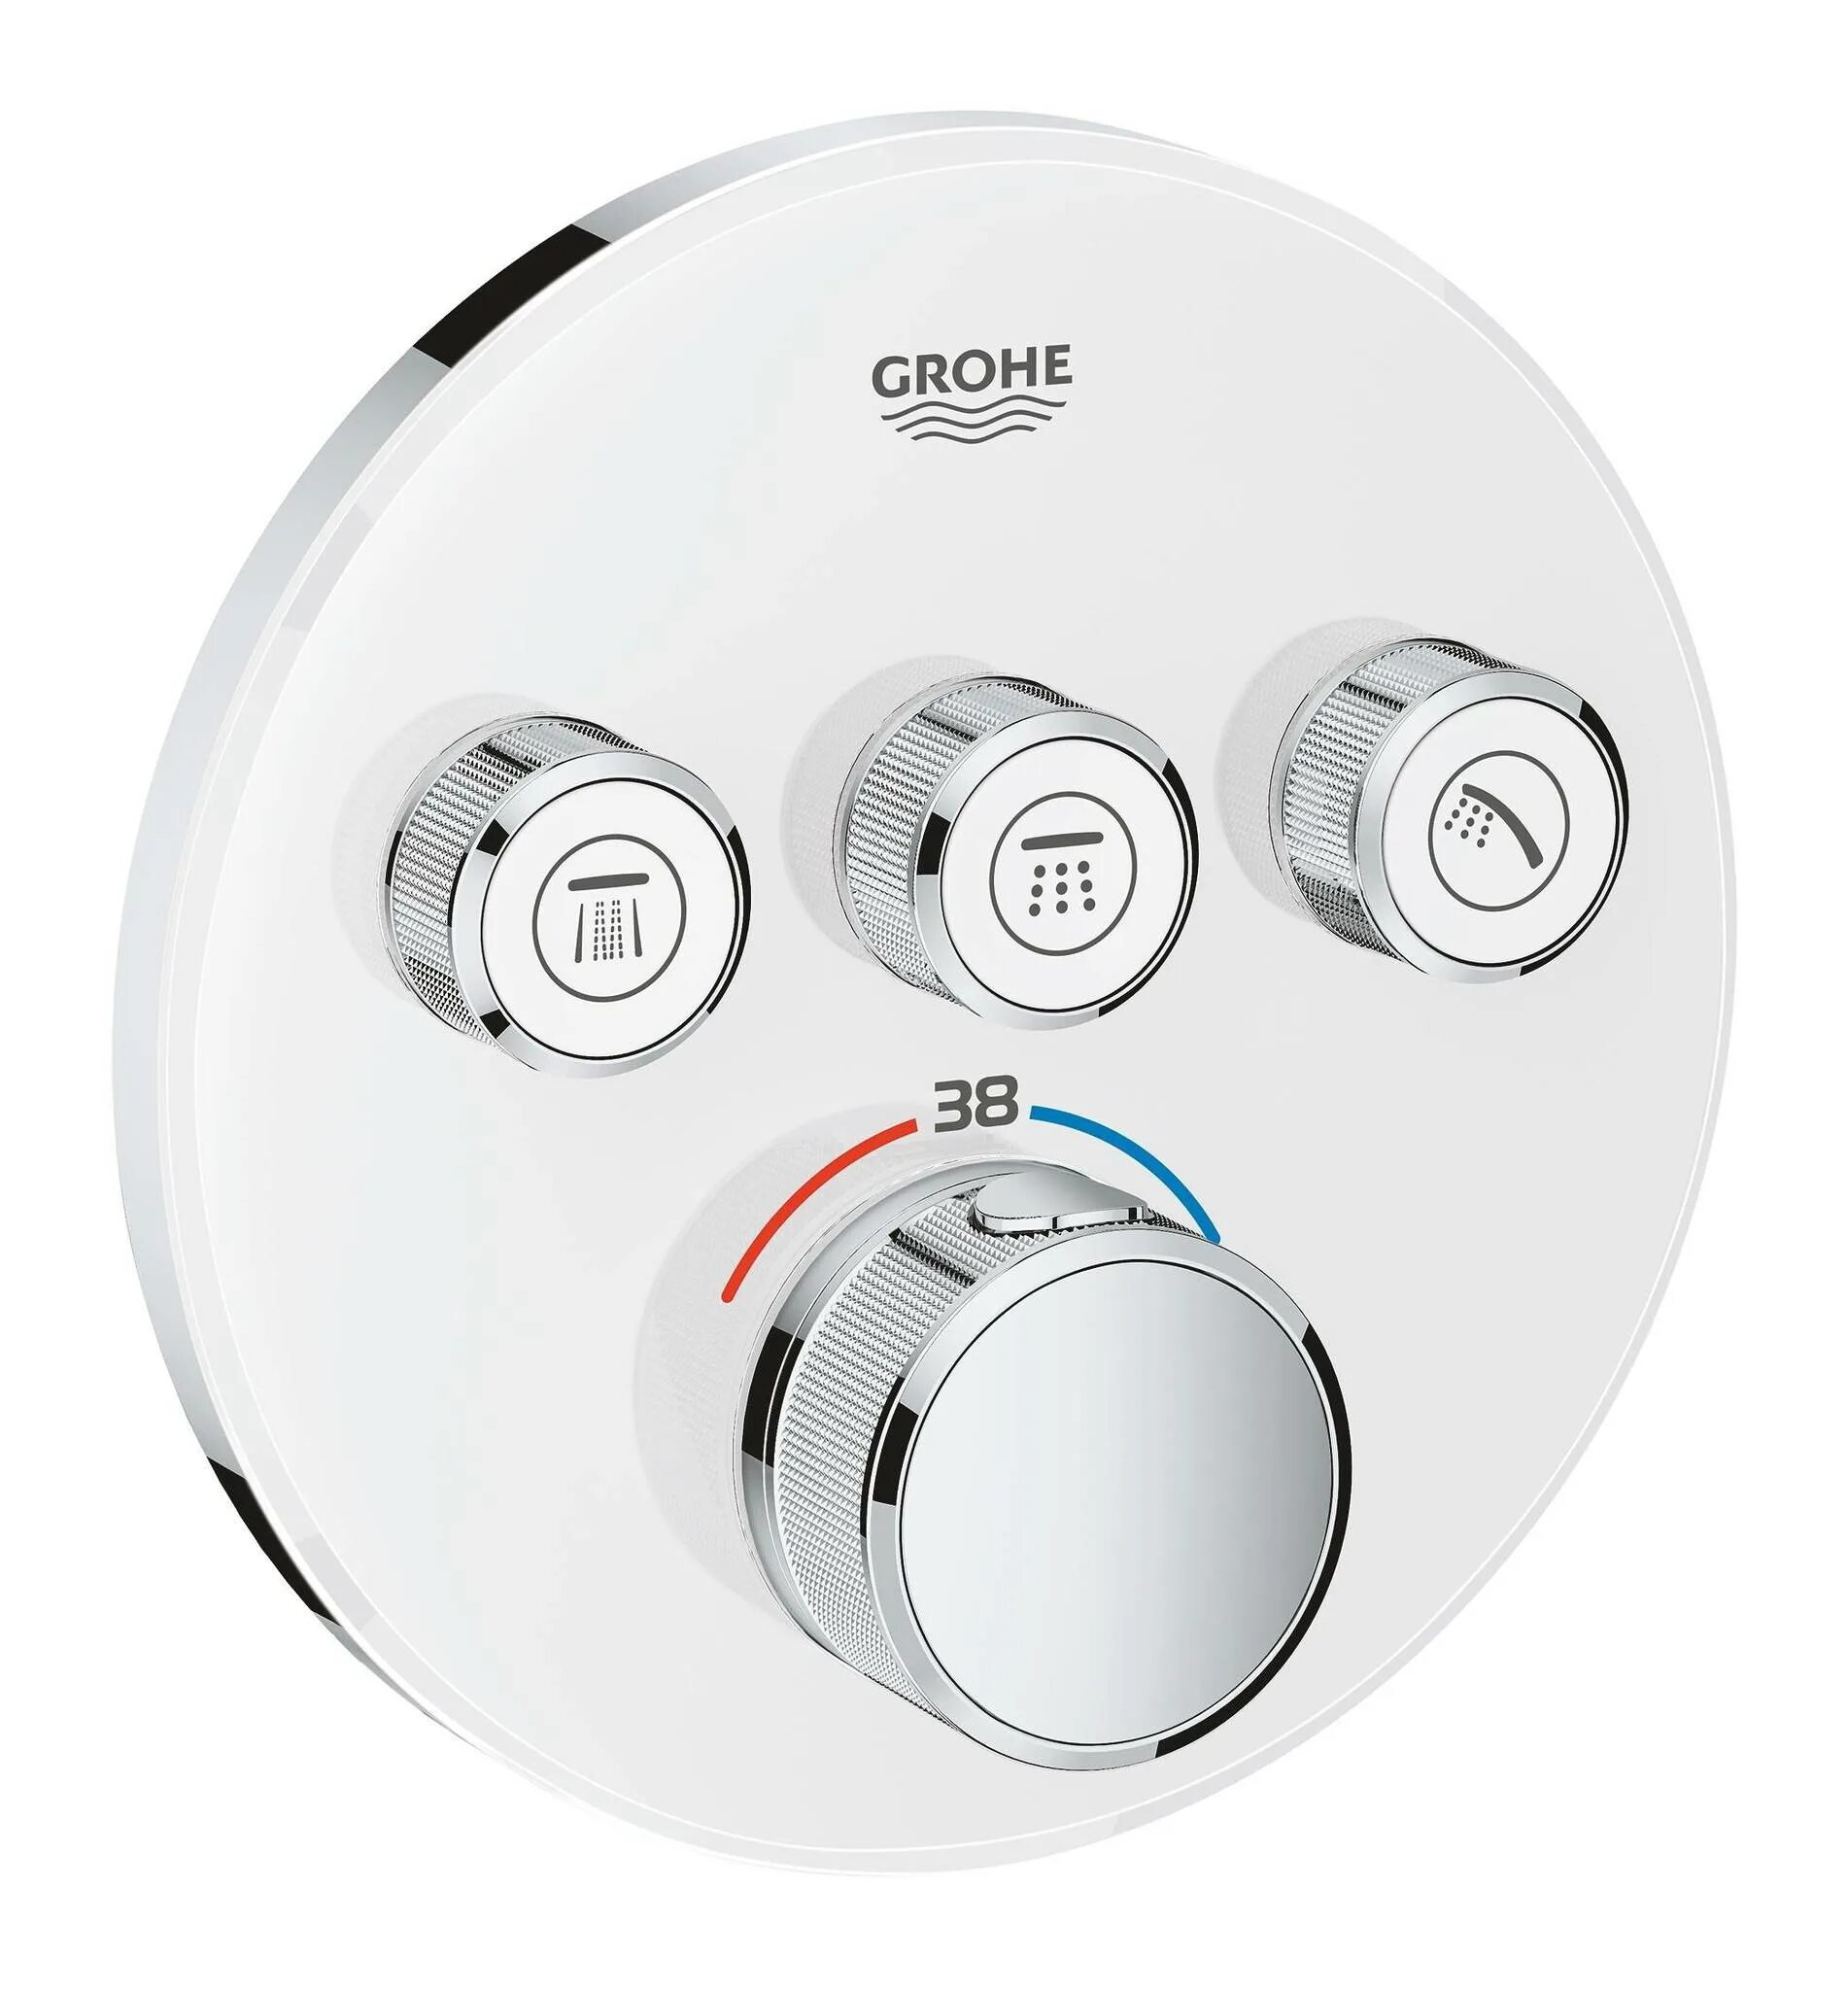 Grohe Grohtherm SMARTCONTROL 29149000. Термостат Grohe 29120000. Термостат Grohe 29125000. Grohe SMARTCONTROL термостат.